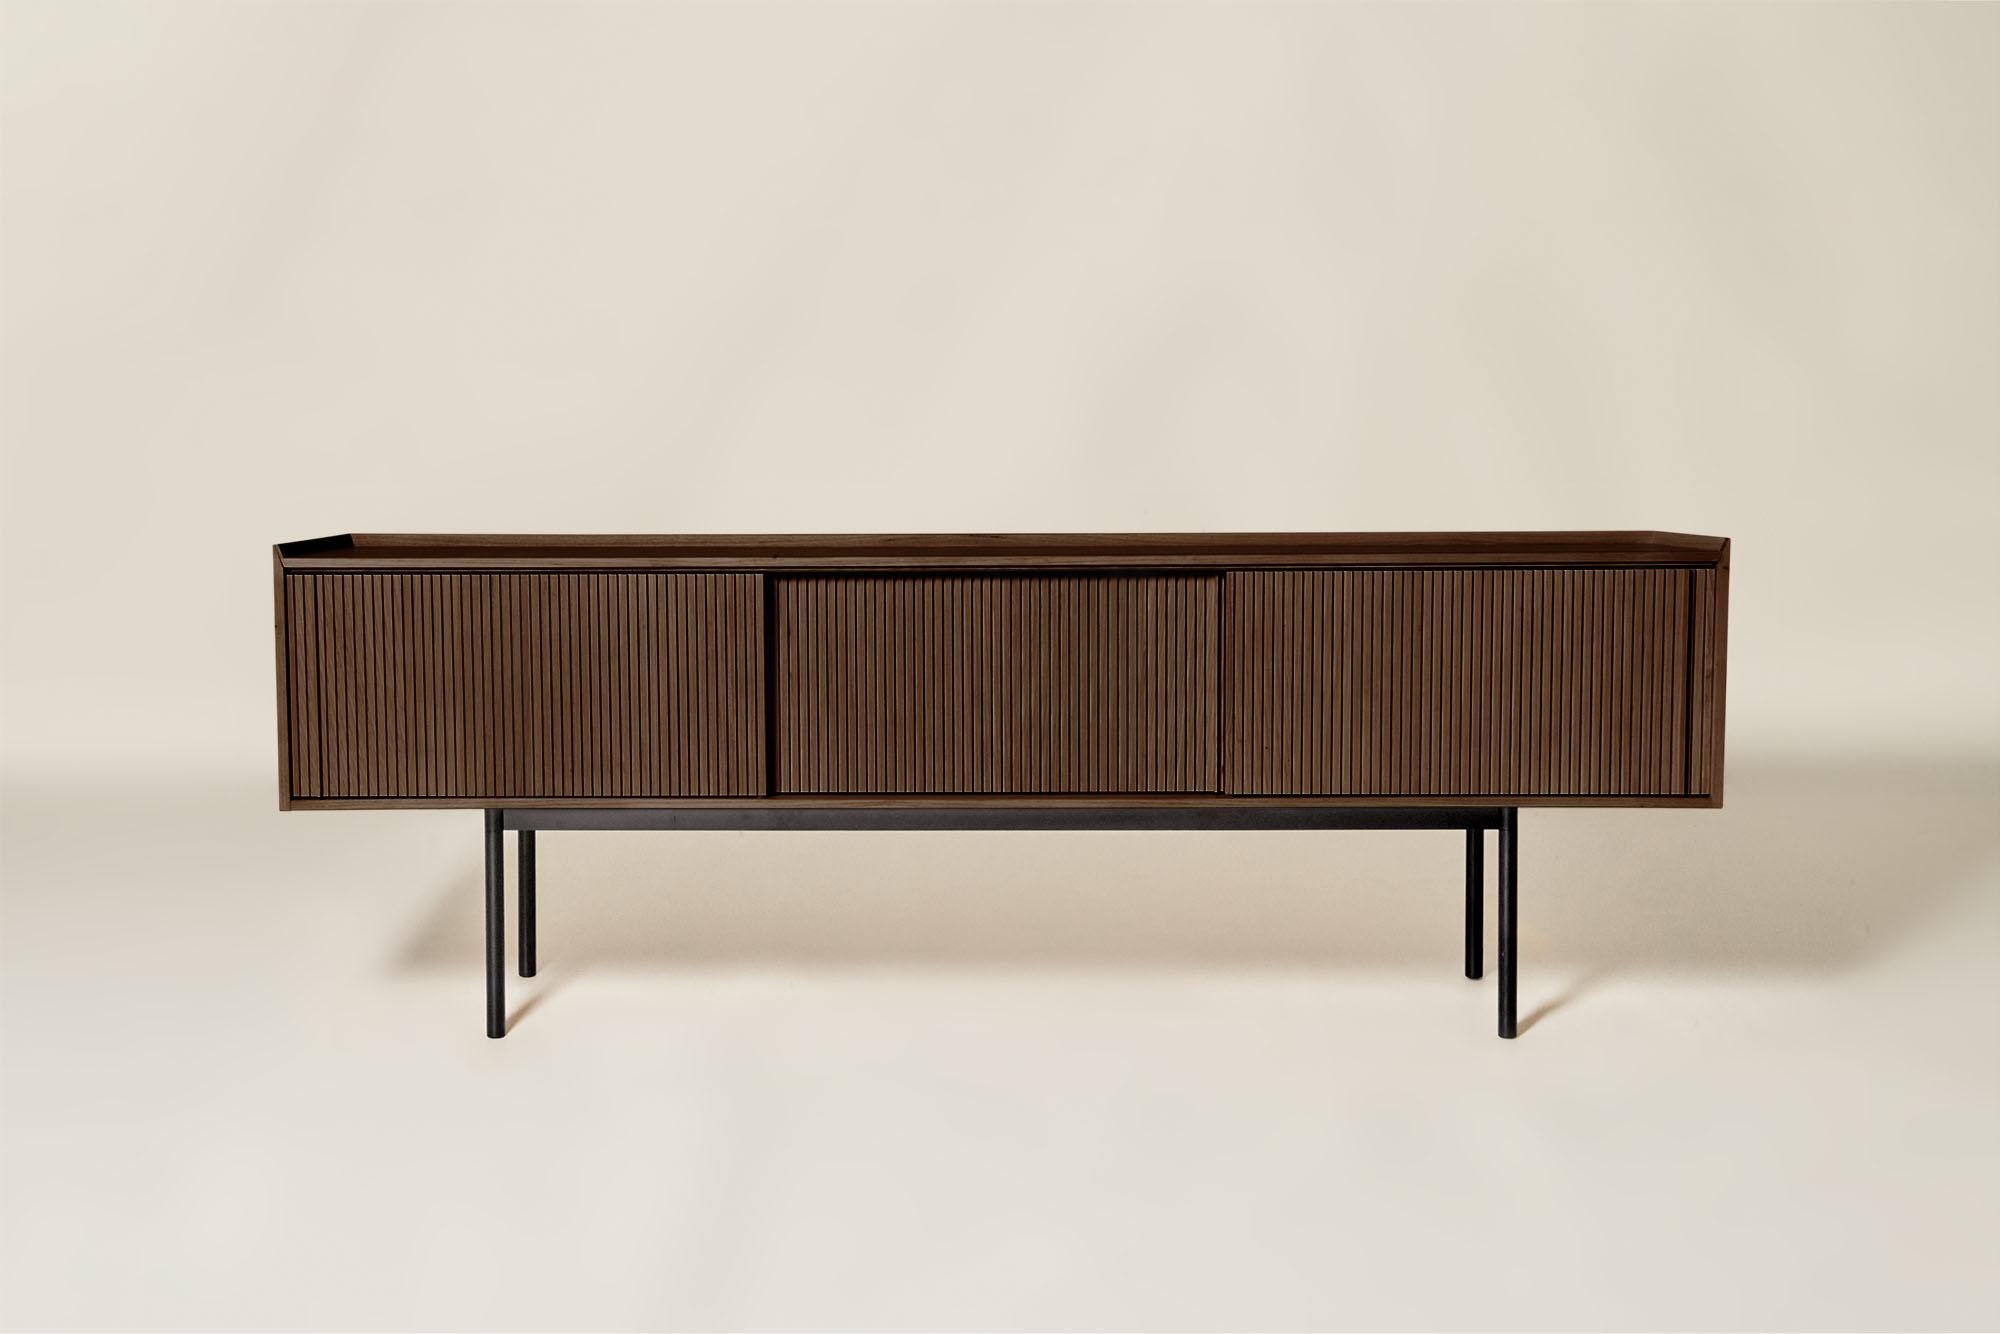 Sipario Solid Wood Sideboard, Ash in Brown Finish, 3 Doors, Contemporary In New Condition For Sale In Cadeglioppi de Oppeano, VR